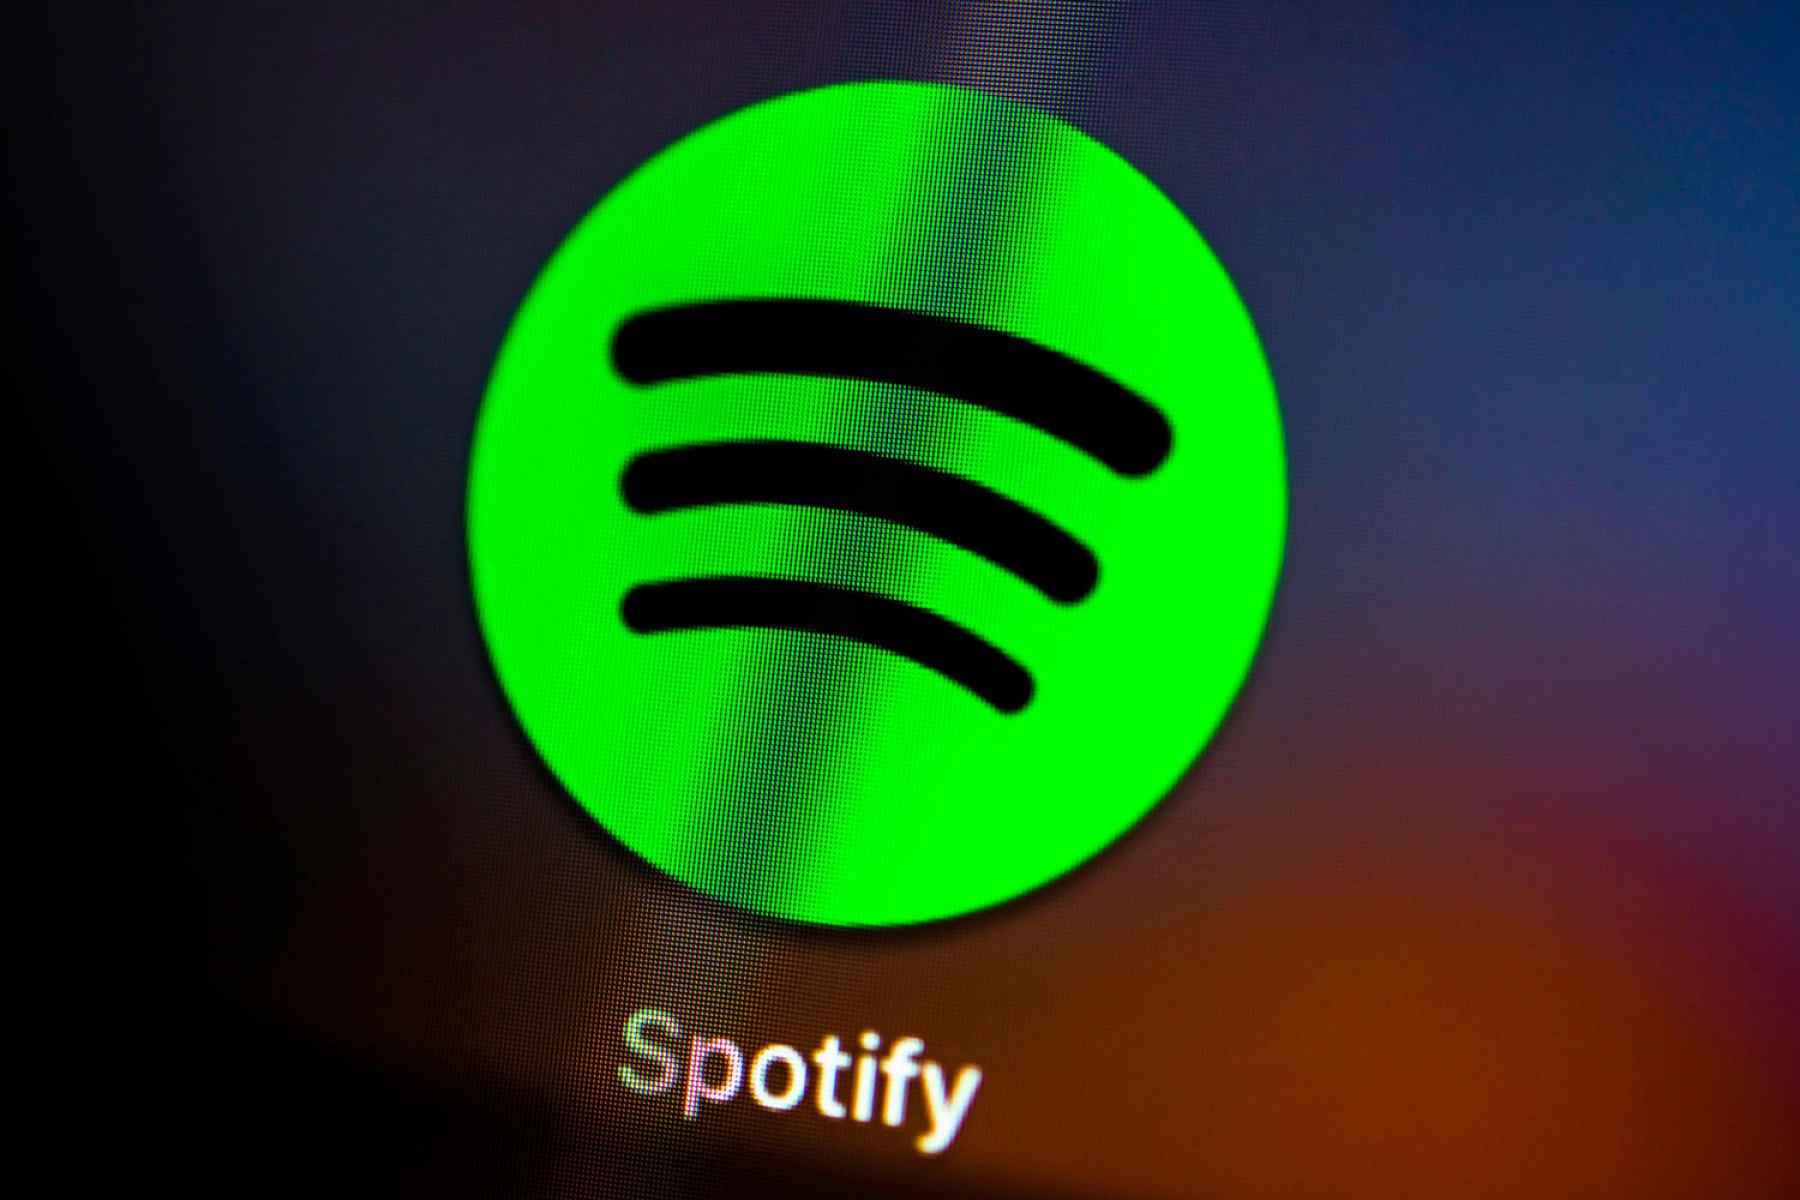 Free Spotify Premium Account Username And Password 2018 Illegally